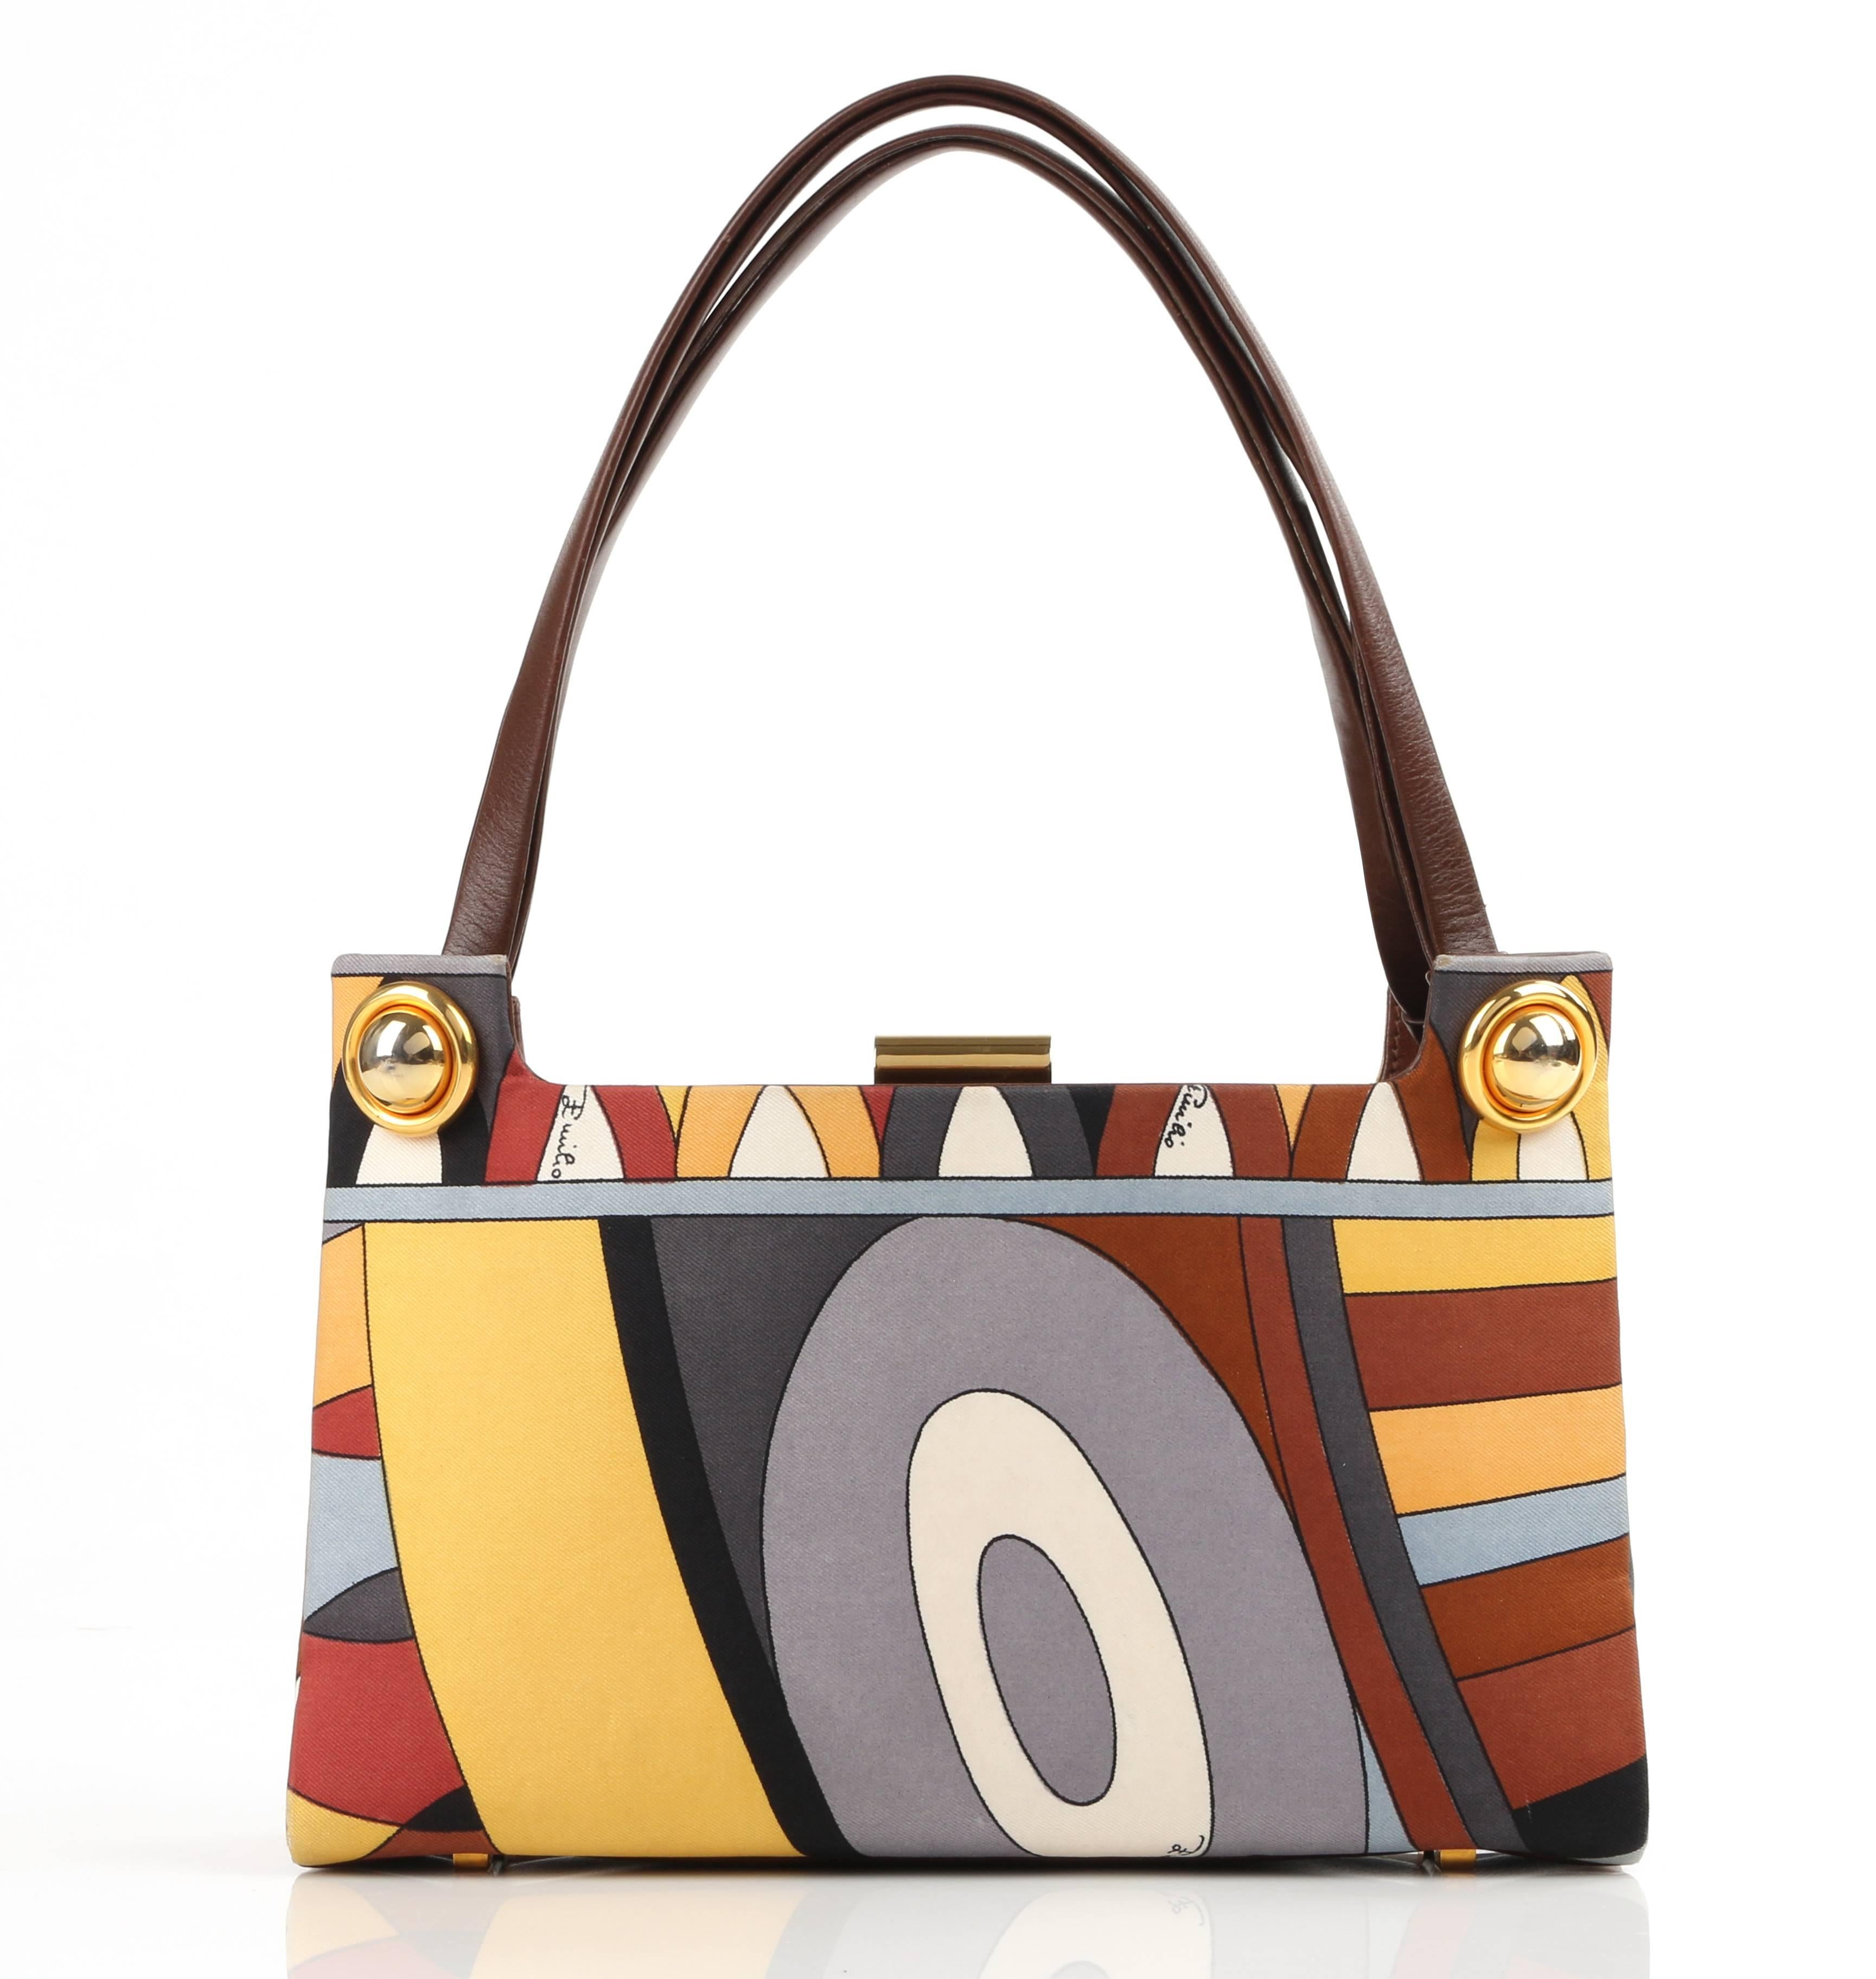 Vintage Emilio Pucci c.1970's brown multi-color signature print silk and leather purse. Multi-color op art signature print silk body in shades of brown, gold, rust red, gray, black, and white. Two flat fold double leather handles. Gusseted sides.